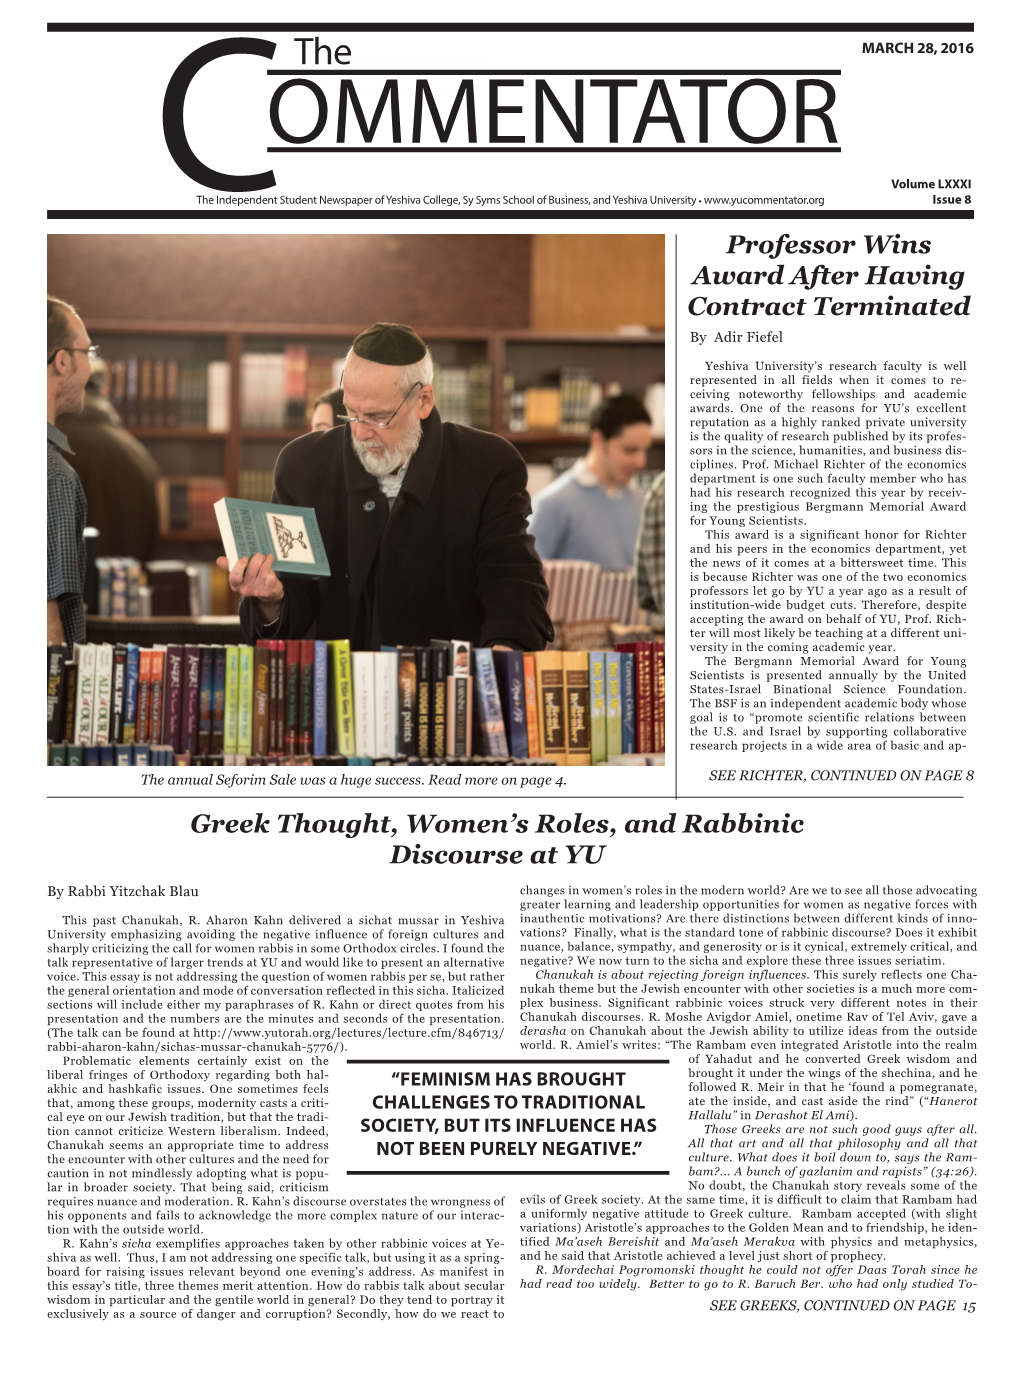 Greek Thought, Women's Roles, and Rabbinic Discourse at YU Professor